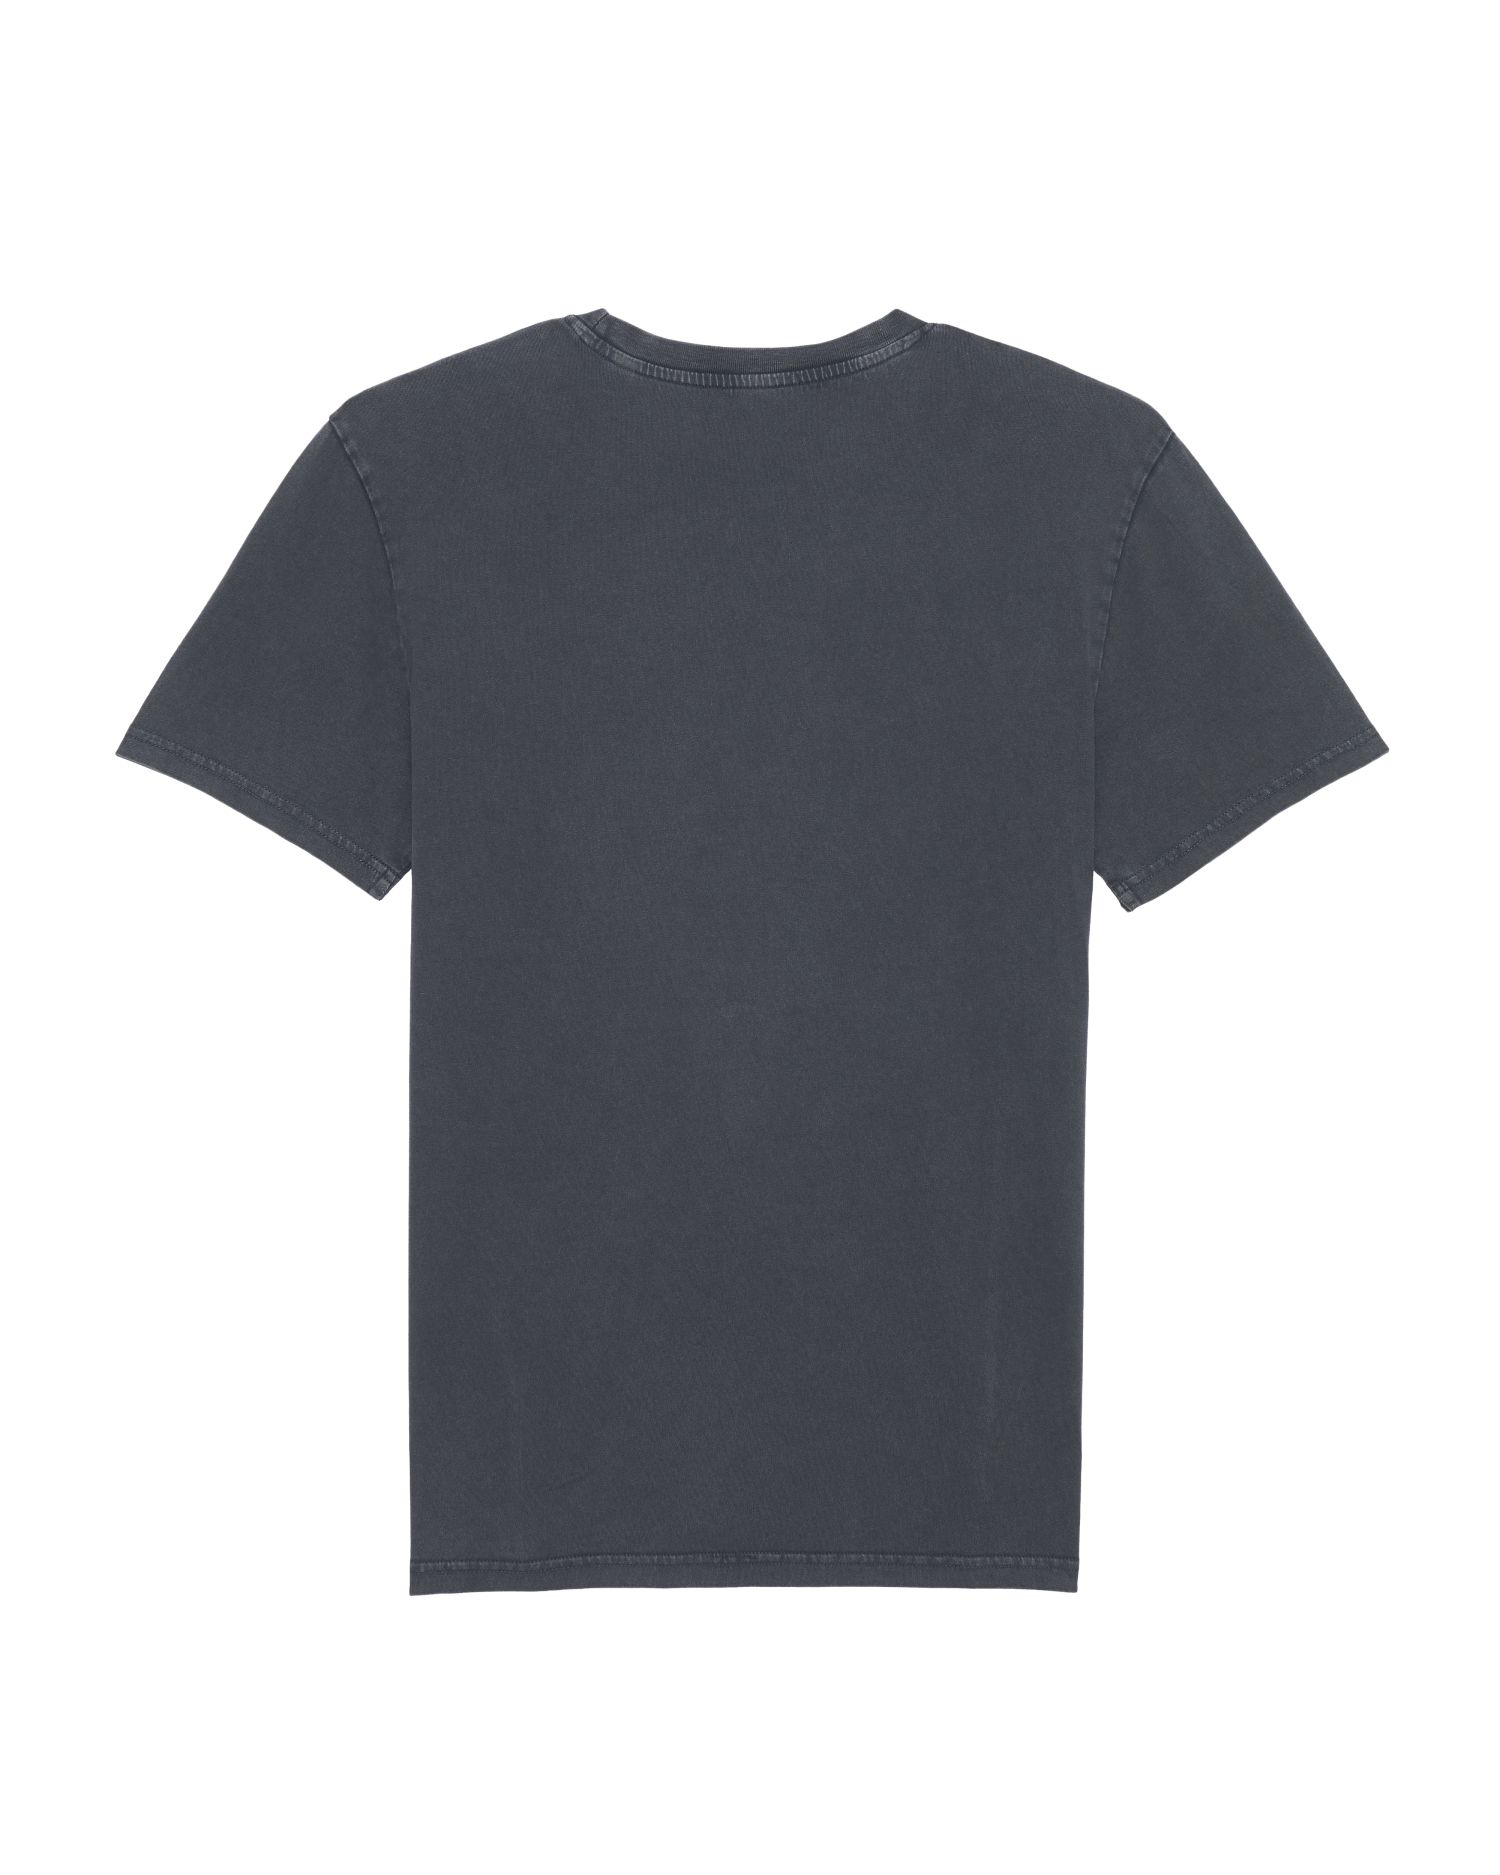 T-Shirt Creator Vintage in Farbe G. Dyed Aged India Ink Grey